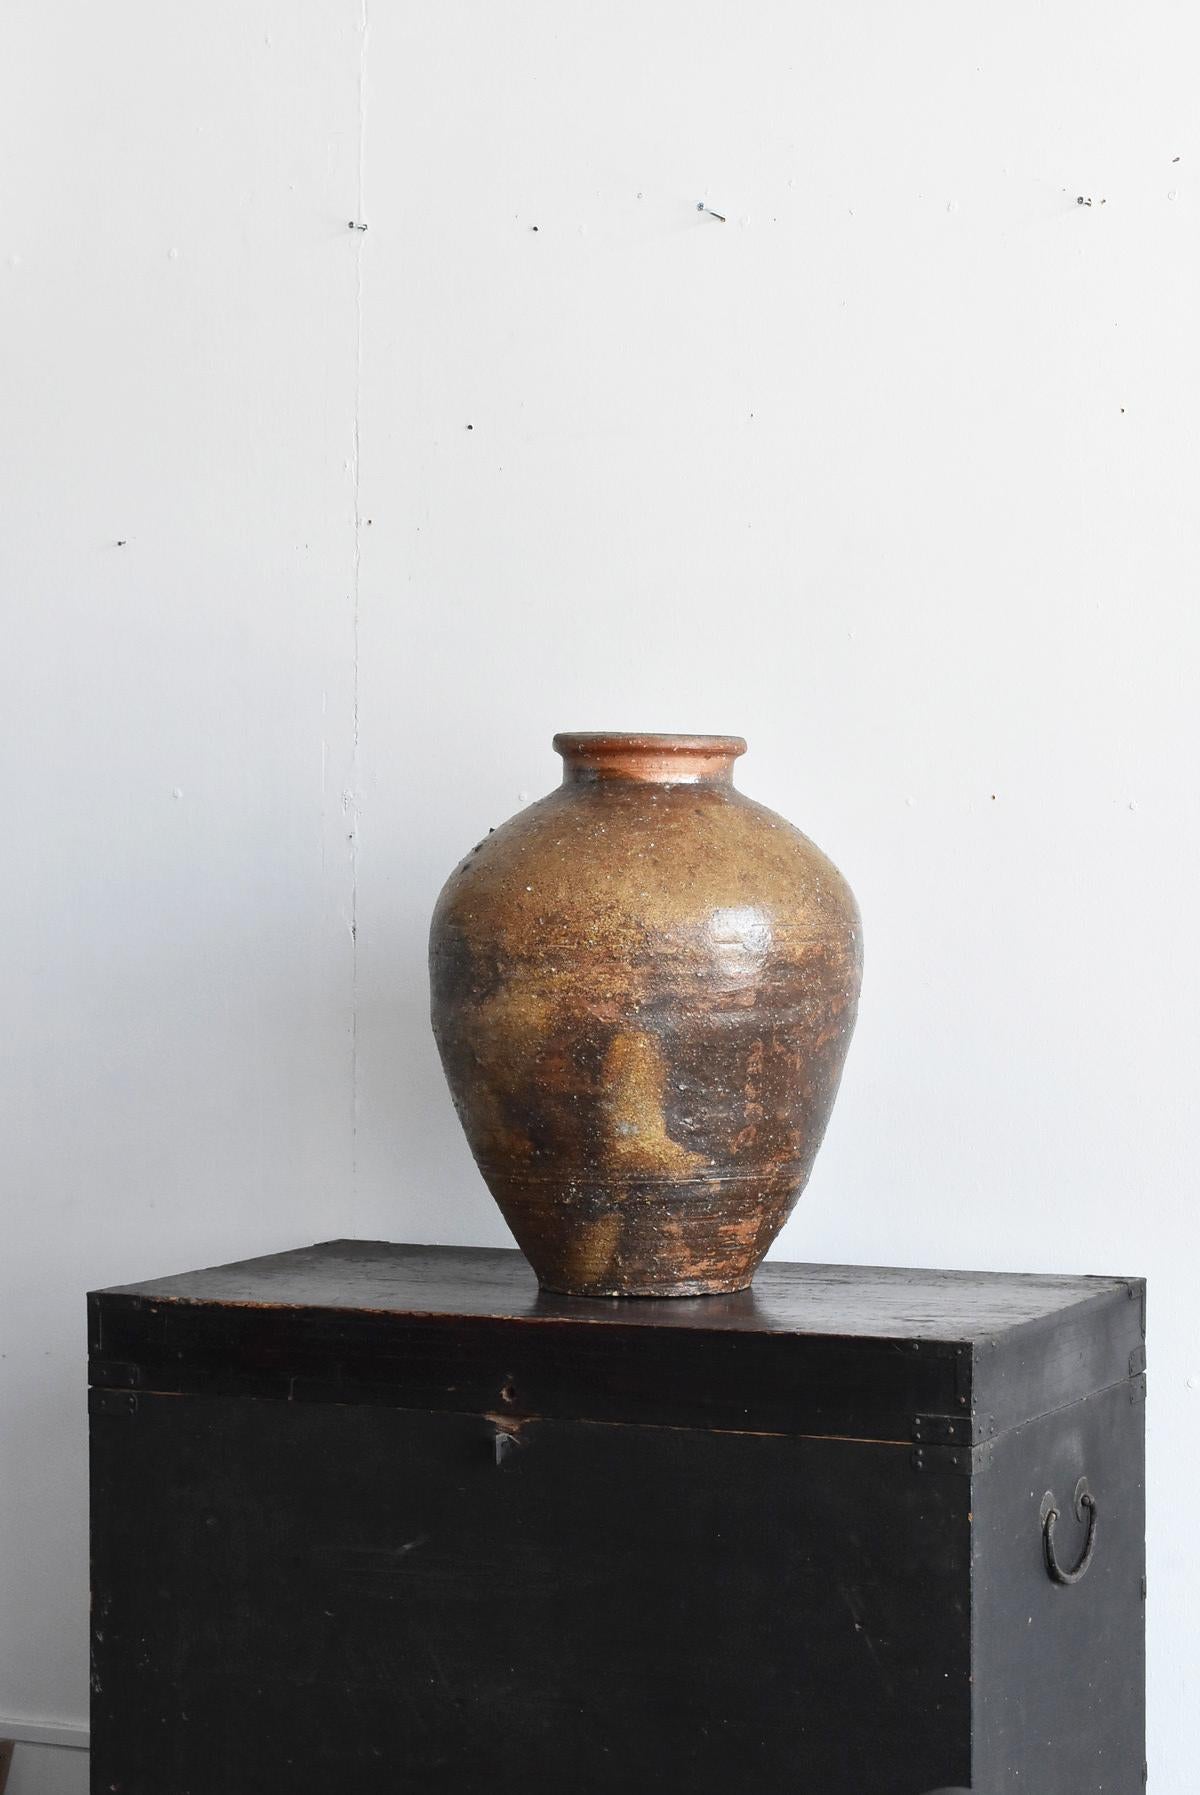 This jar was built between the Momoyama period and the first half of the Edo period (1573-1700).
It is 